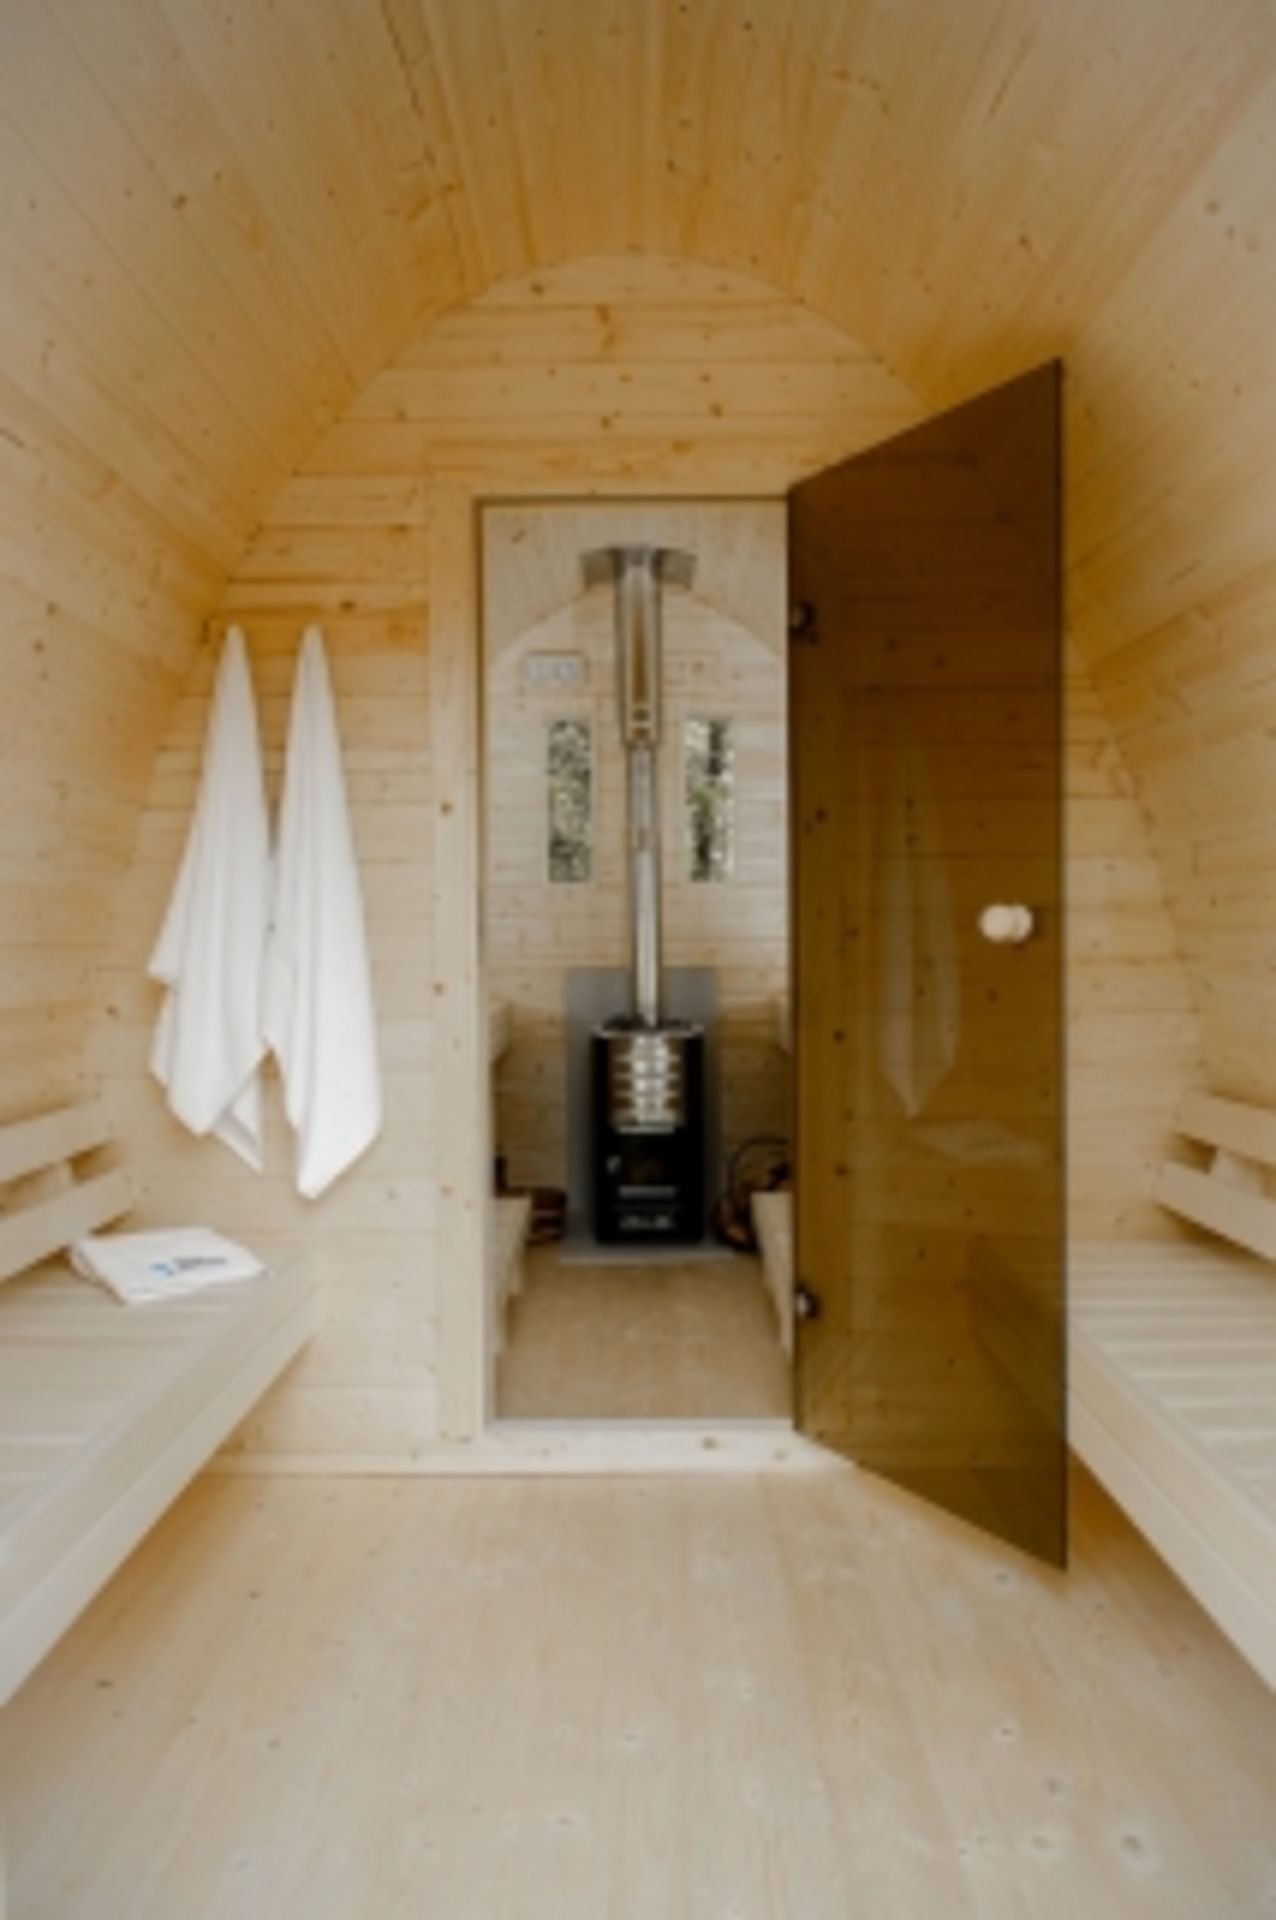 V Brand New 2.4 x 4m Sauna Pod - Made From Spruce Wood - Roof Covered With Bitumen Shingles - Two - Image 2 of 2